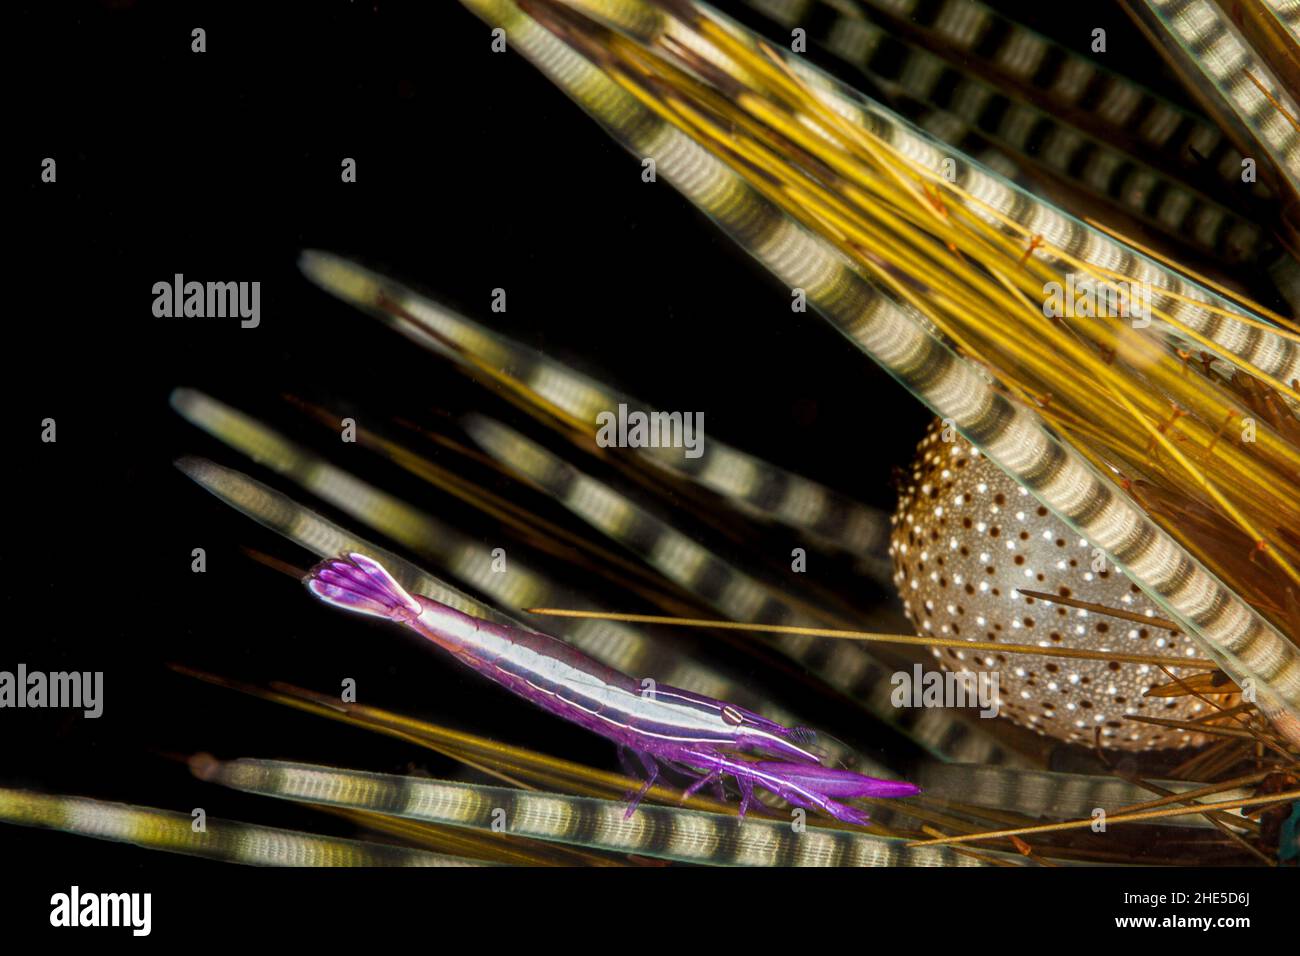 A tiny white-strip urchin shrimp, Stegopontonia commensalis, clings to the spines of a juvinile banded urchin, Echinothrix calamaris, Maui, Hawaii. Stock Photo